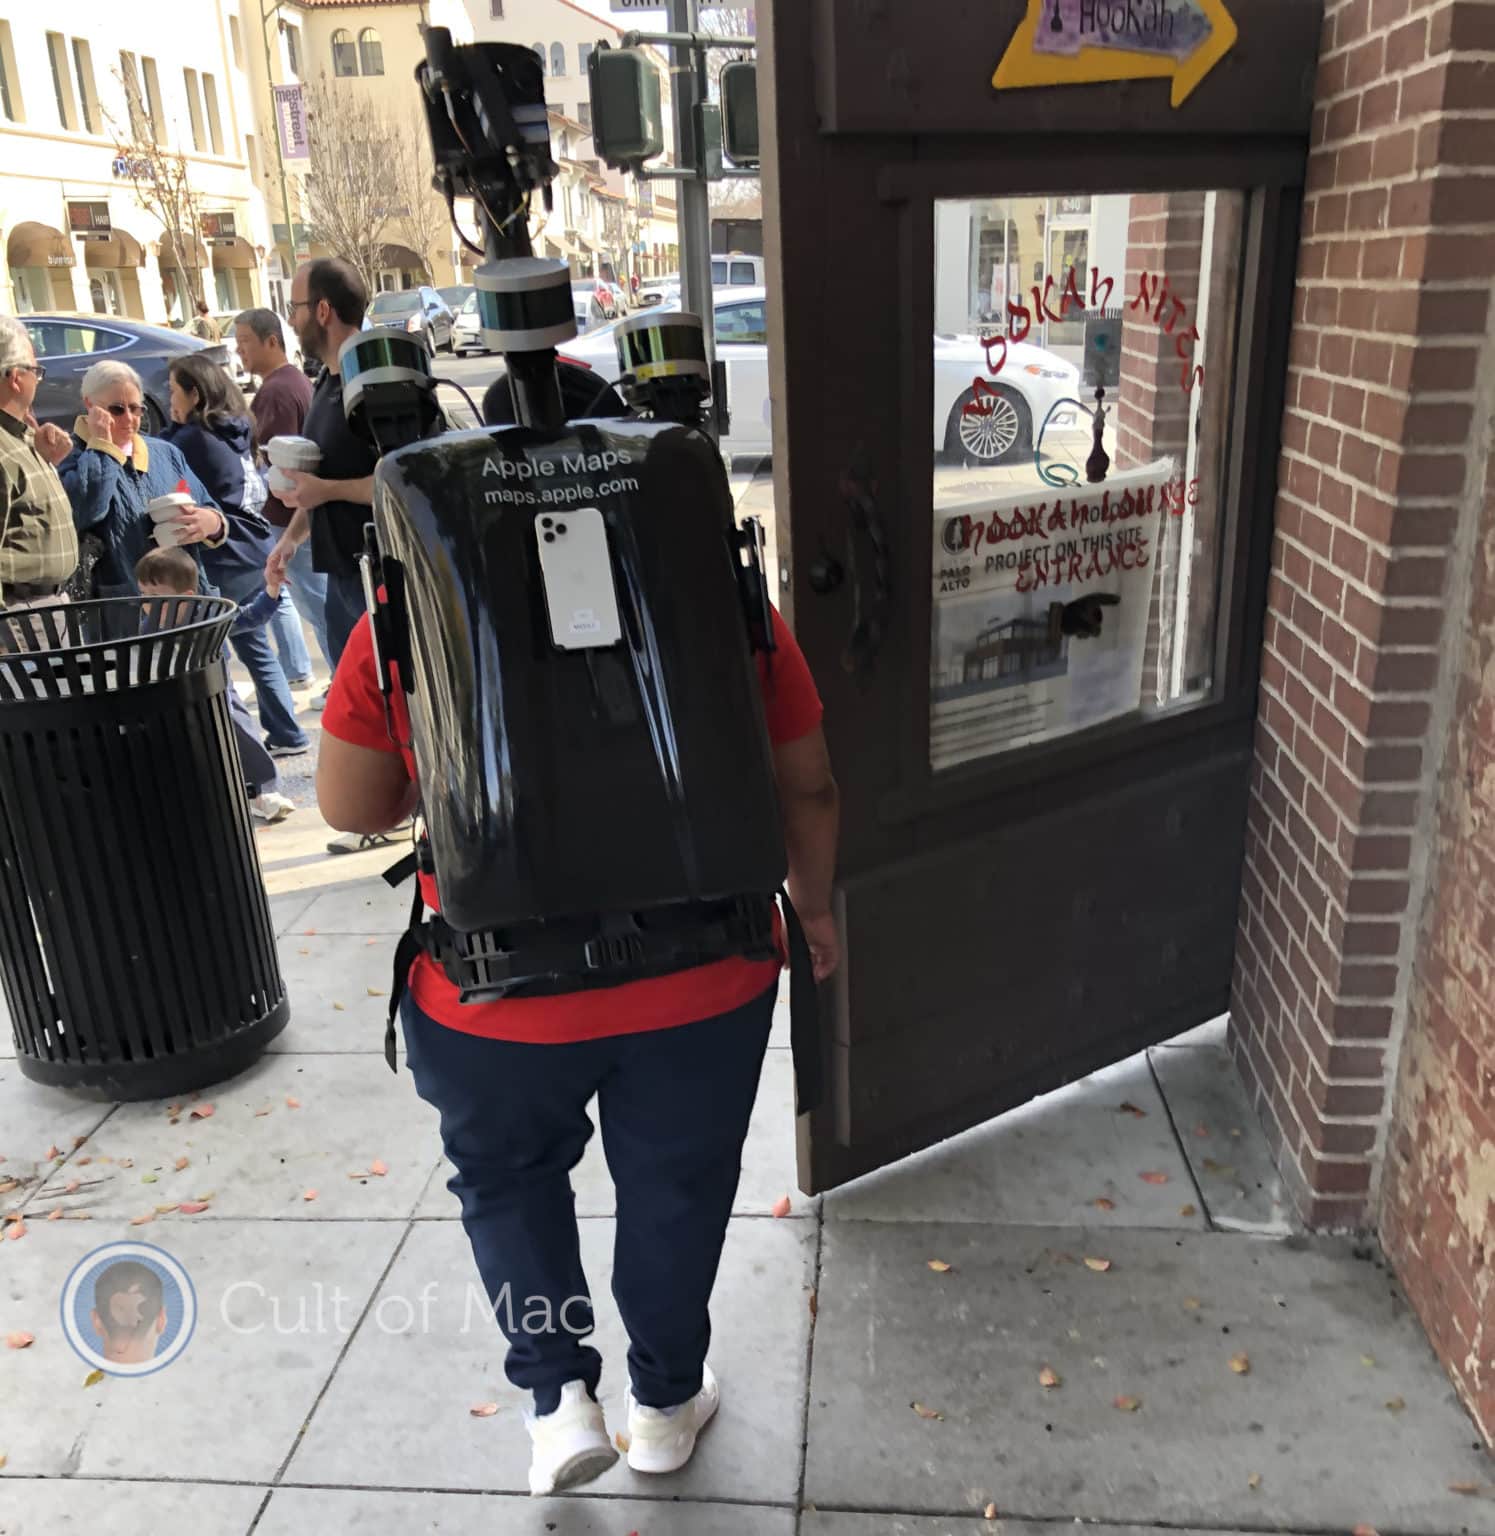 Have you seen one of these guys walking around your city with an upgraded Apple Maps backpack with iPhone 11 Pros?